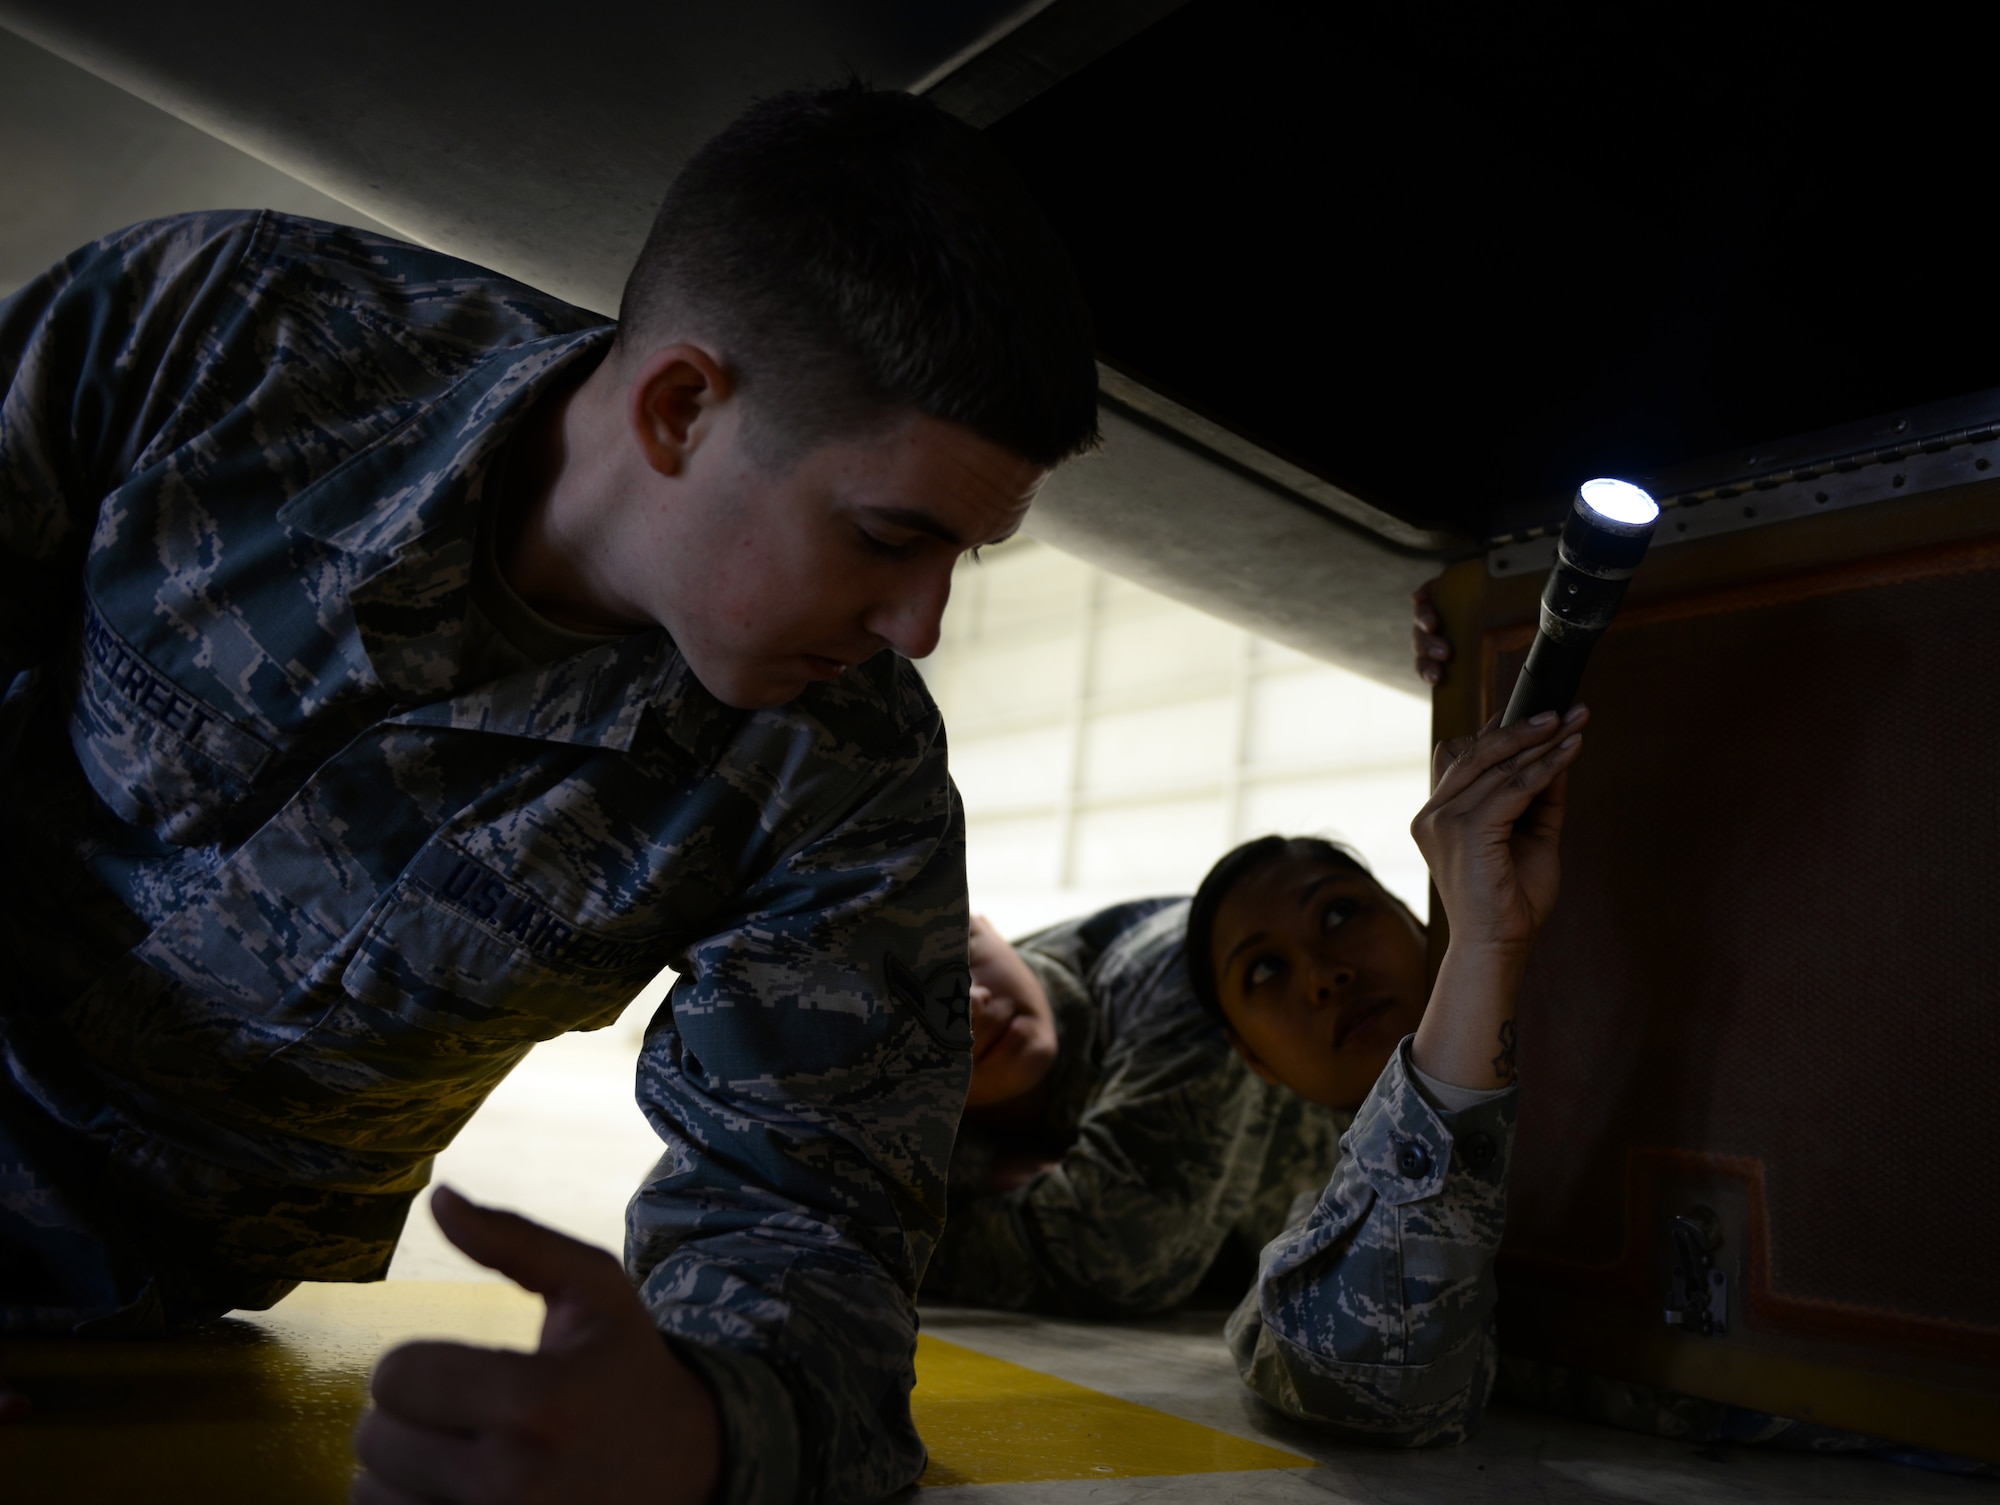 Tech. Sgt. Maureen Madamba (right), 372nd Training Squadron Detachment 21 maintenance instructor, inspects the interior of a RQ-4 Global Hawk with Airman Murray Hemstreet , 372nd TRS Detachment 21, student, Jan. 20, 2015, at Beale Air Force Base, Calif. Hemstreet is one of the first students to attend the  RQ-4 remotely piloted aircraft maintenance course taught at Beale. (U.S. Air Force photo by Senior Airman Bobby Cummings/Released)